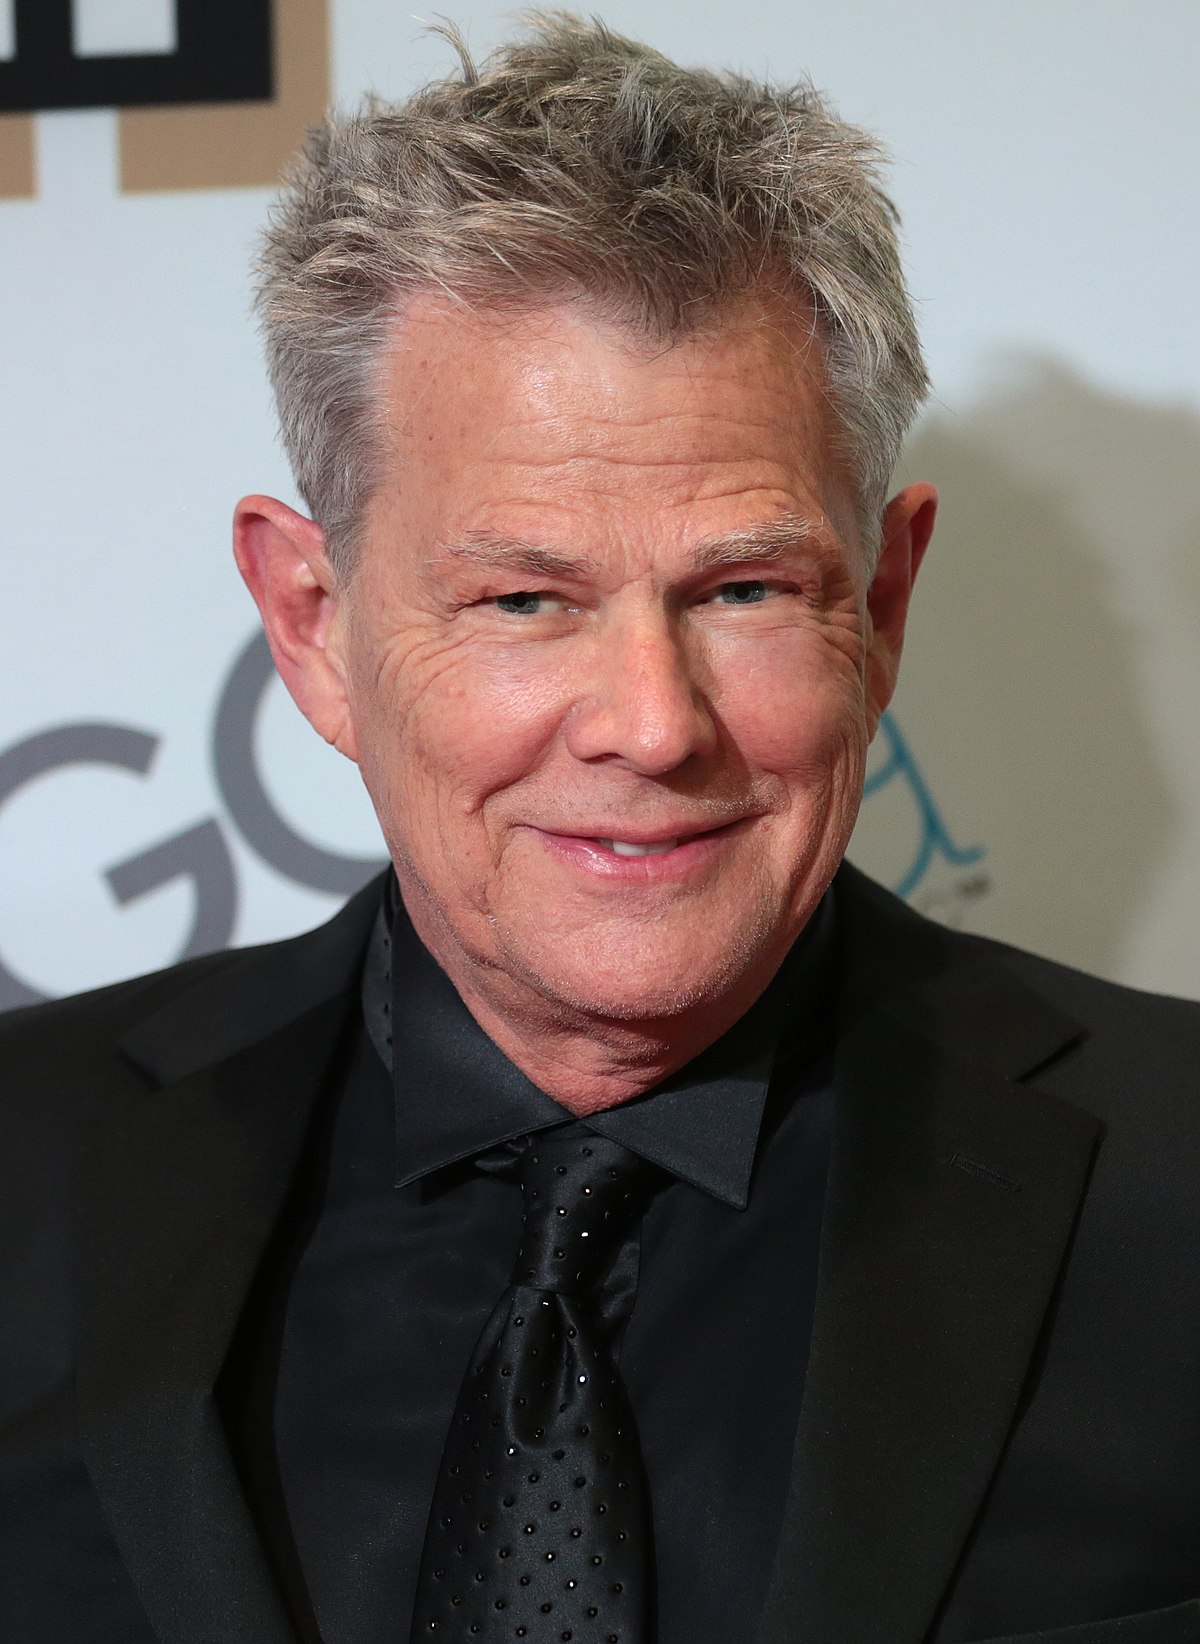 How tall is David Foster?